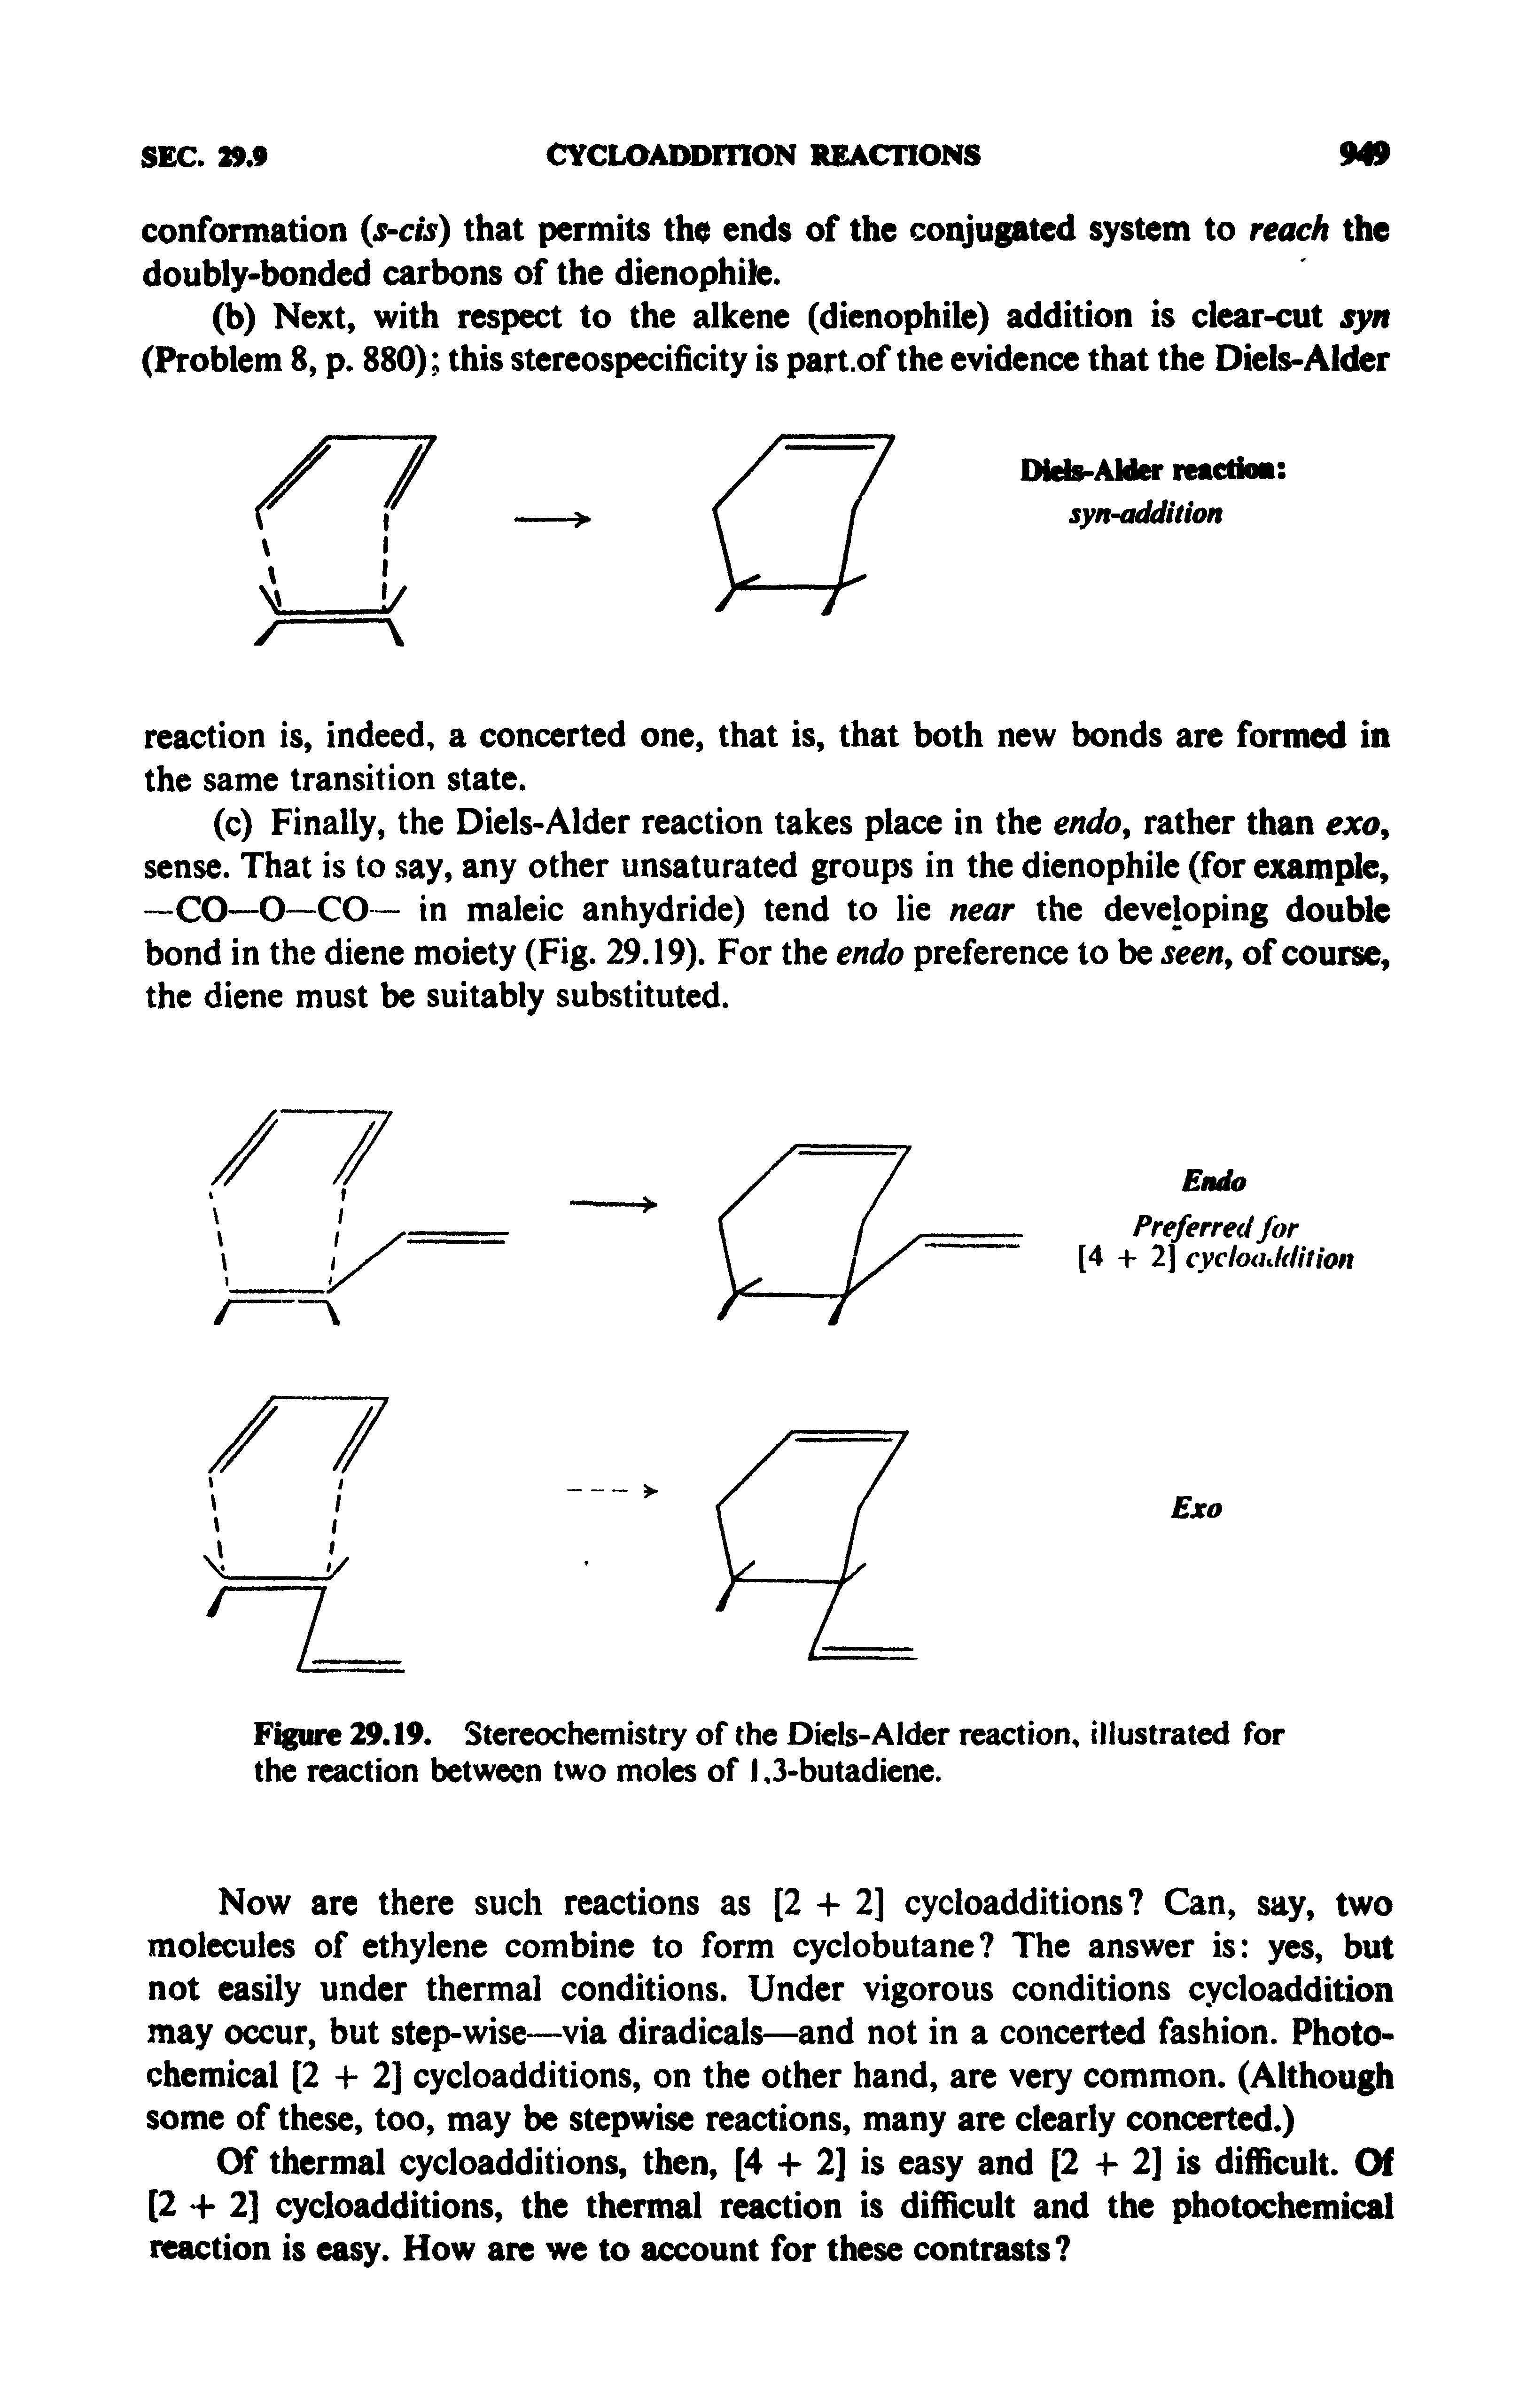 Figure 29.19. Stereochemistry of the Diels-Alder reaction, illustrated for the reaction between two moles of 1,3-butadiene.